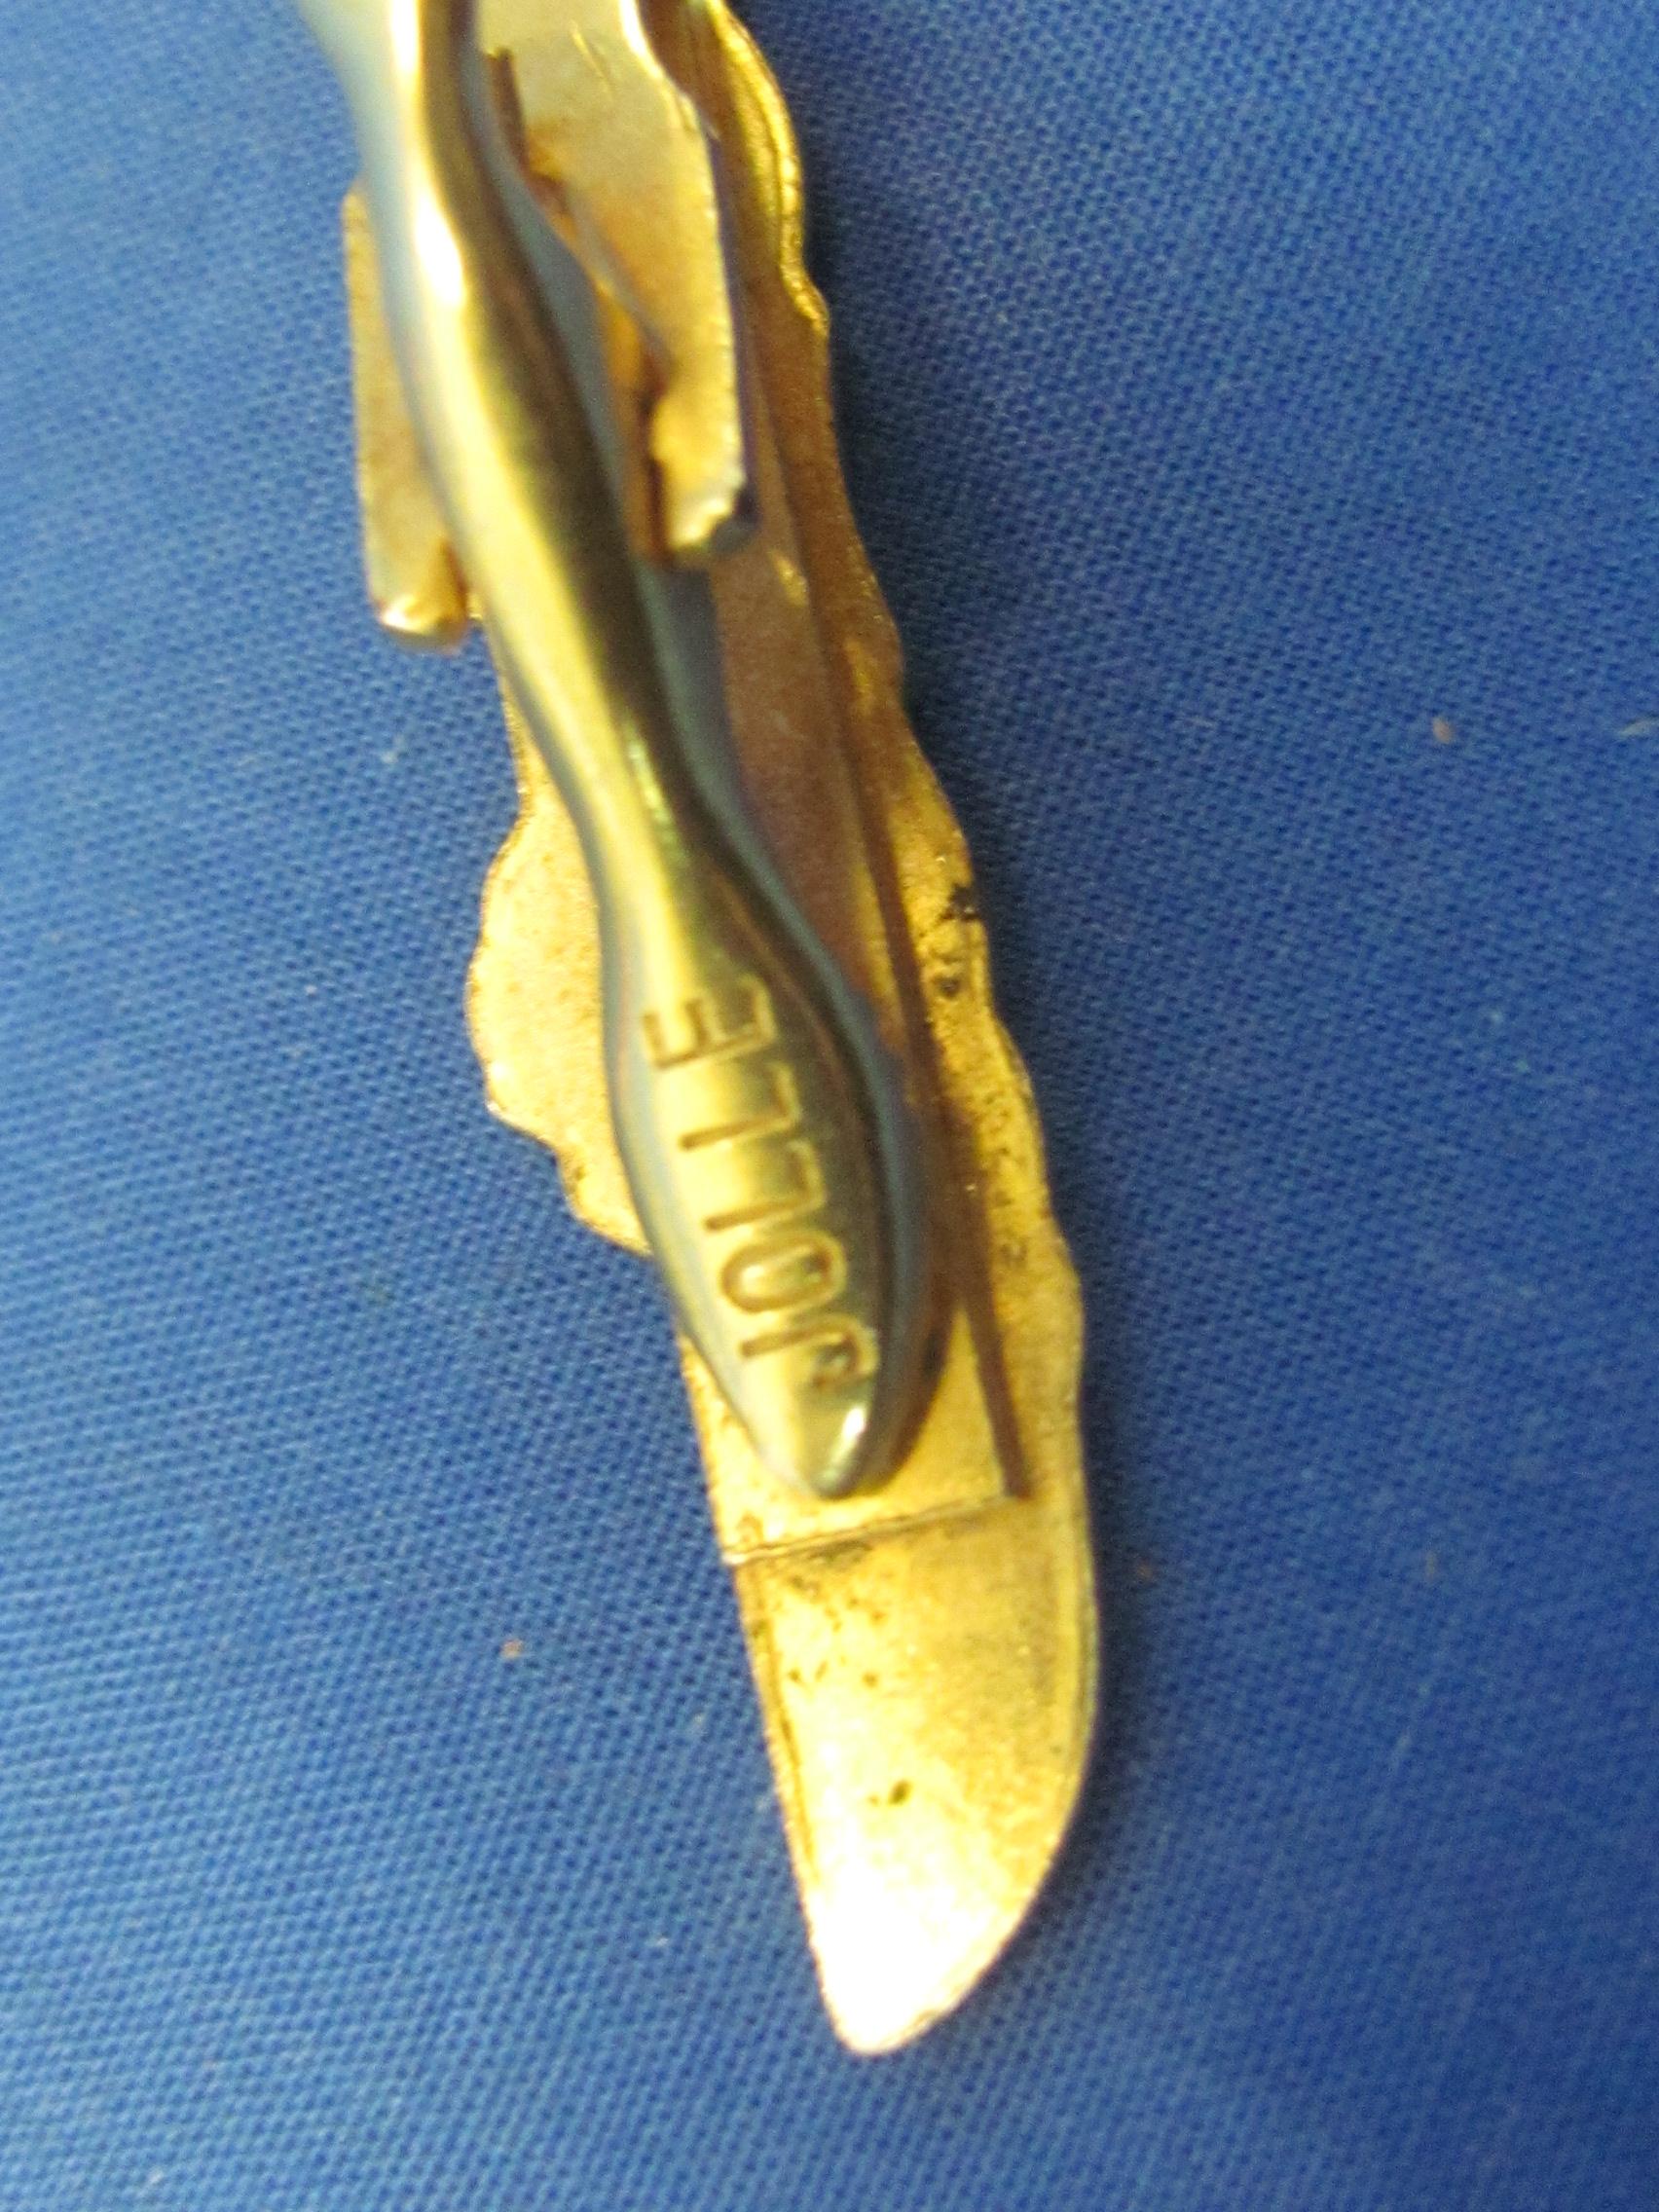 JFK Kennedy 60 Tie Clasp – Goldtone Figural PT Boat – 1 3/4” long – Good condition